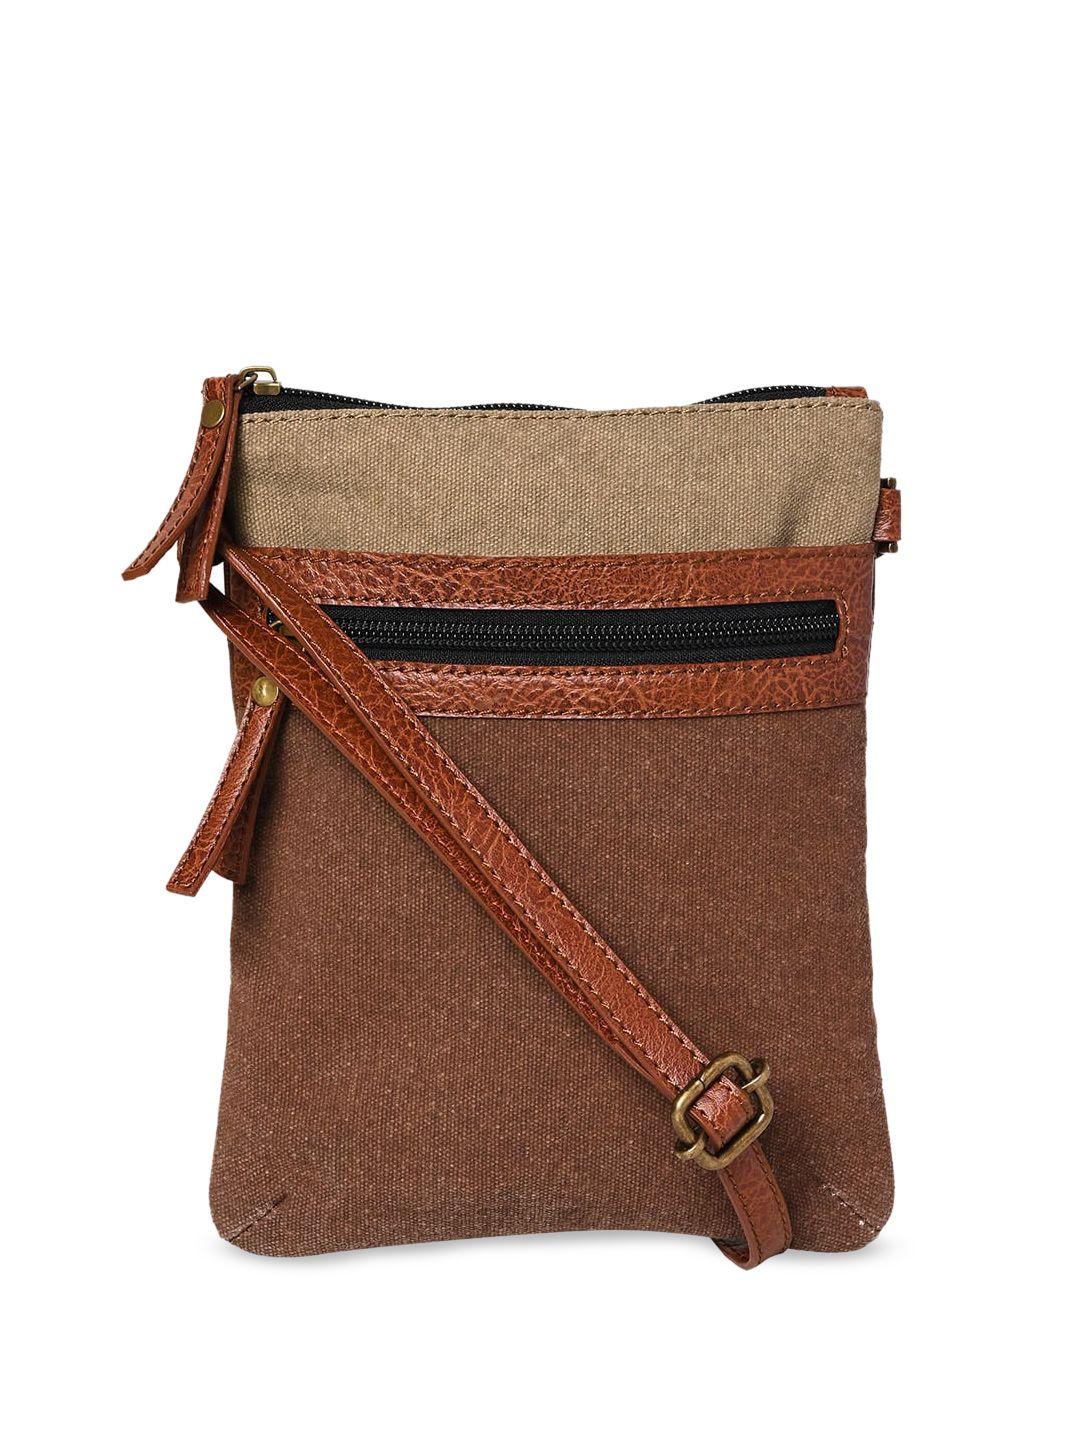 mona b brown swagger sling bag with tasselled